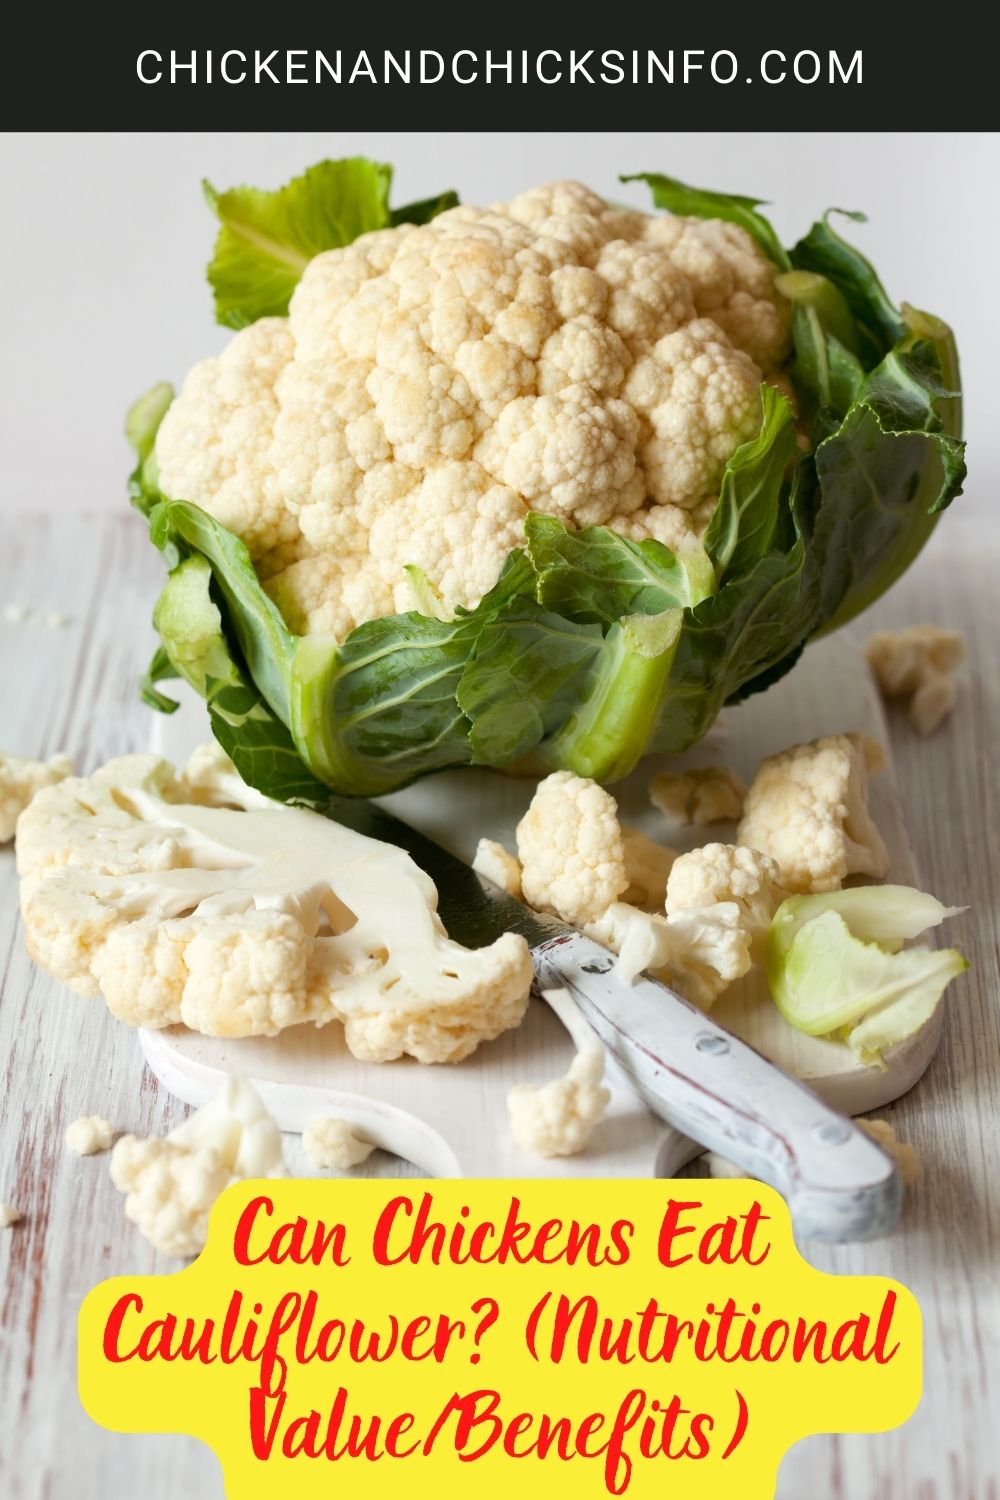 Can Chickens Eat Cauliflower? (Nutritional Value/Benefits) poster.
